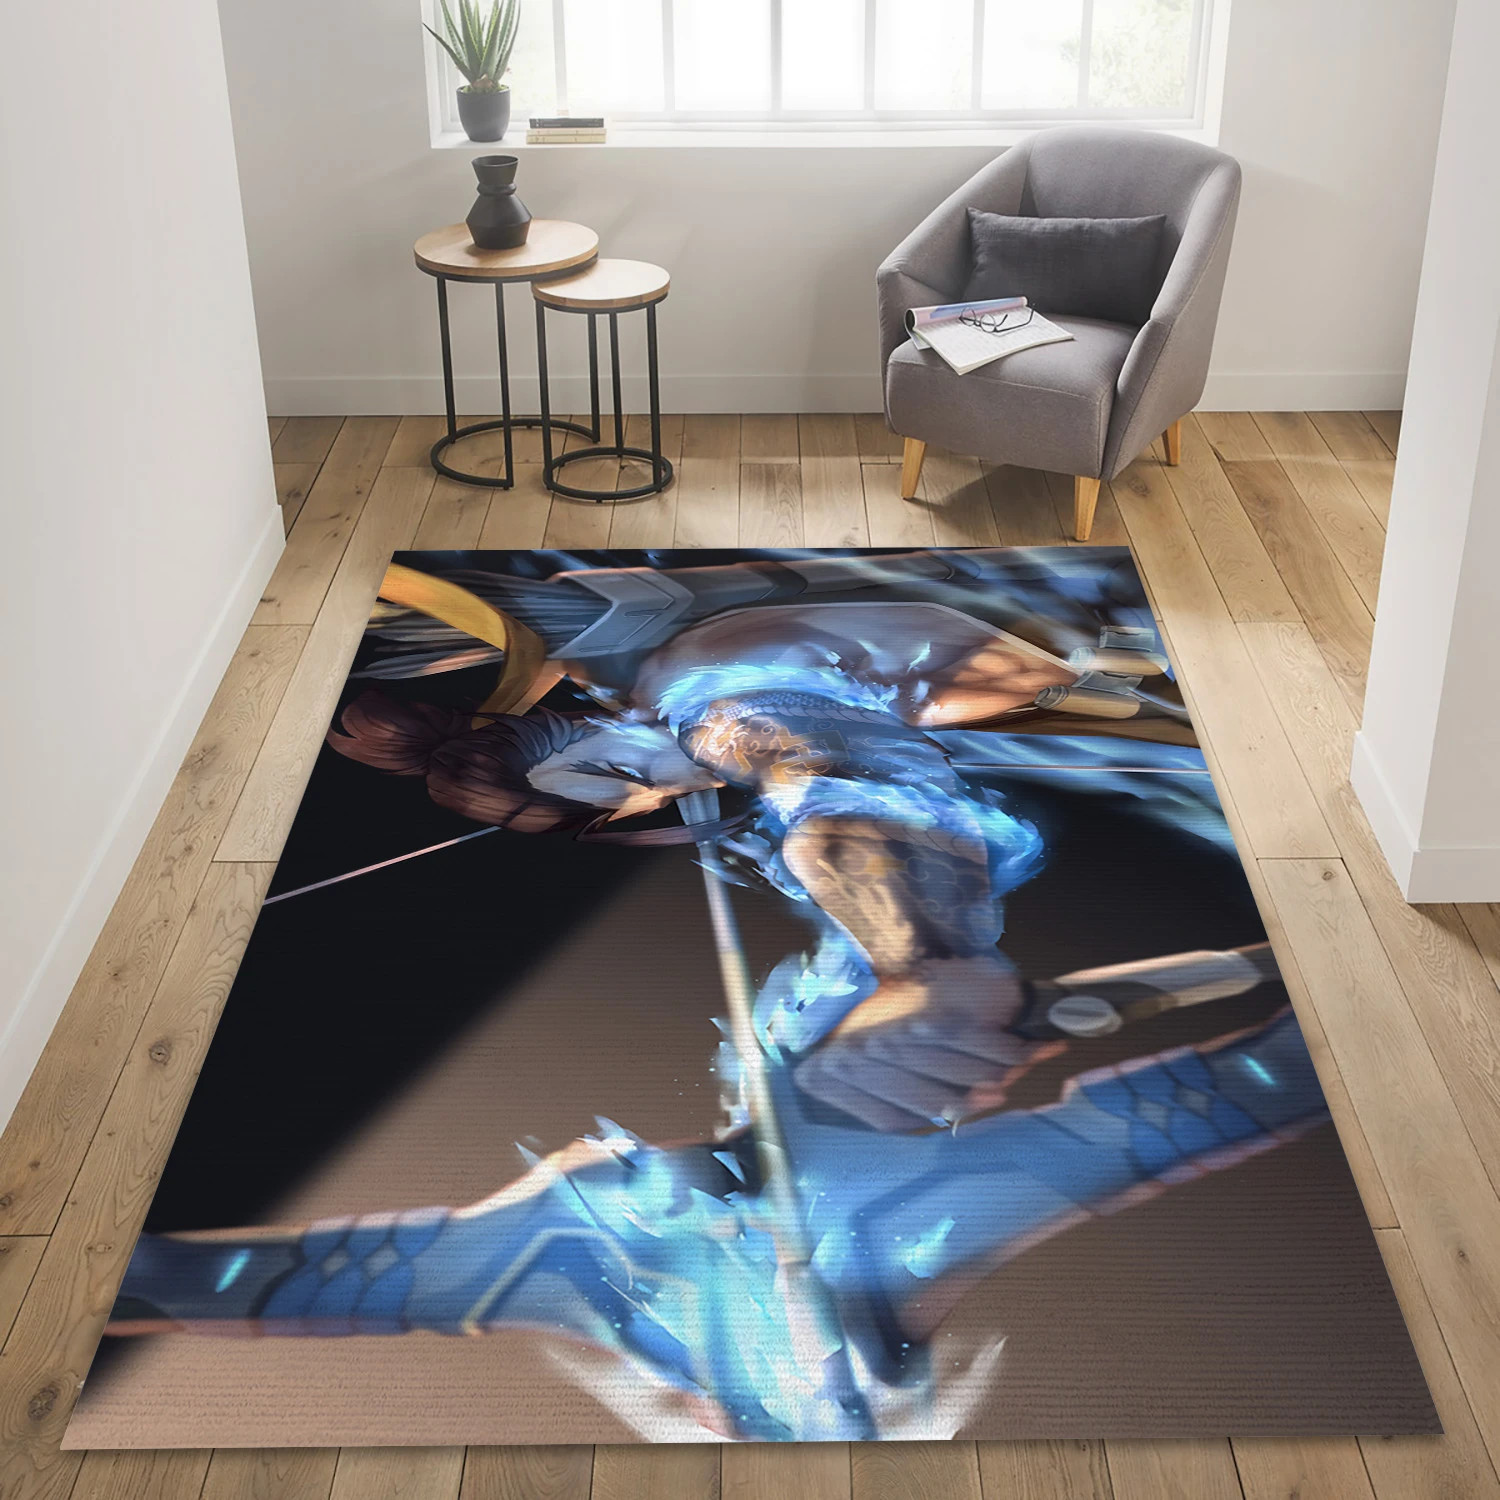 Hanzo Overwatch Gaming Area Rug, Living Room Rug - Family Gift US Decor - Indoor Outdoor Rugs 2